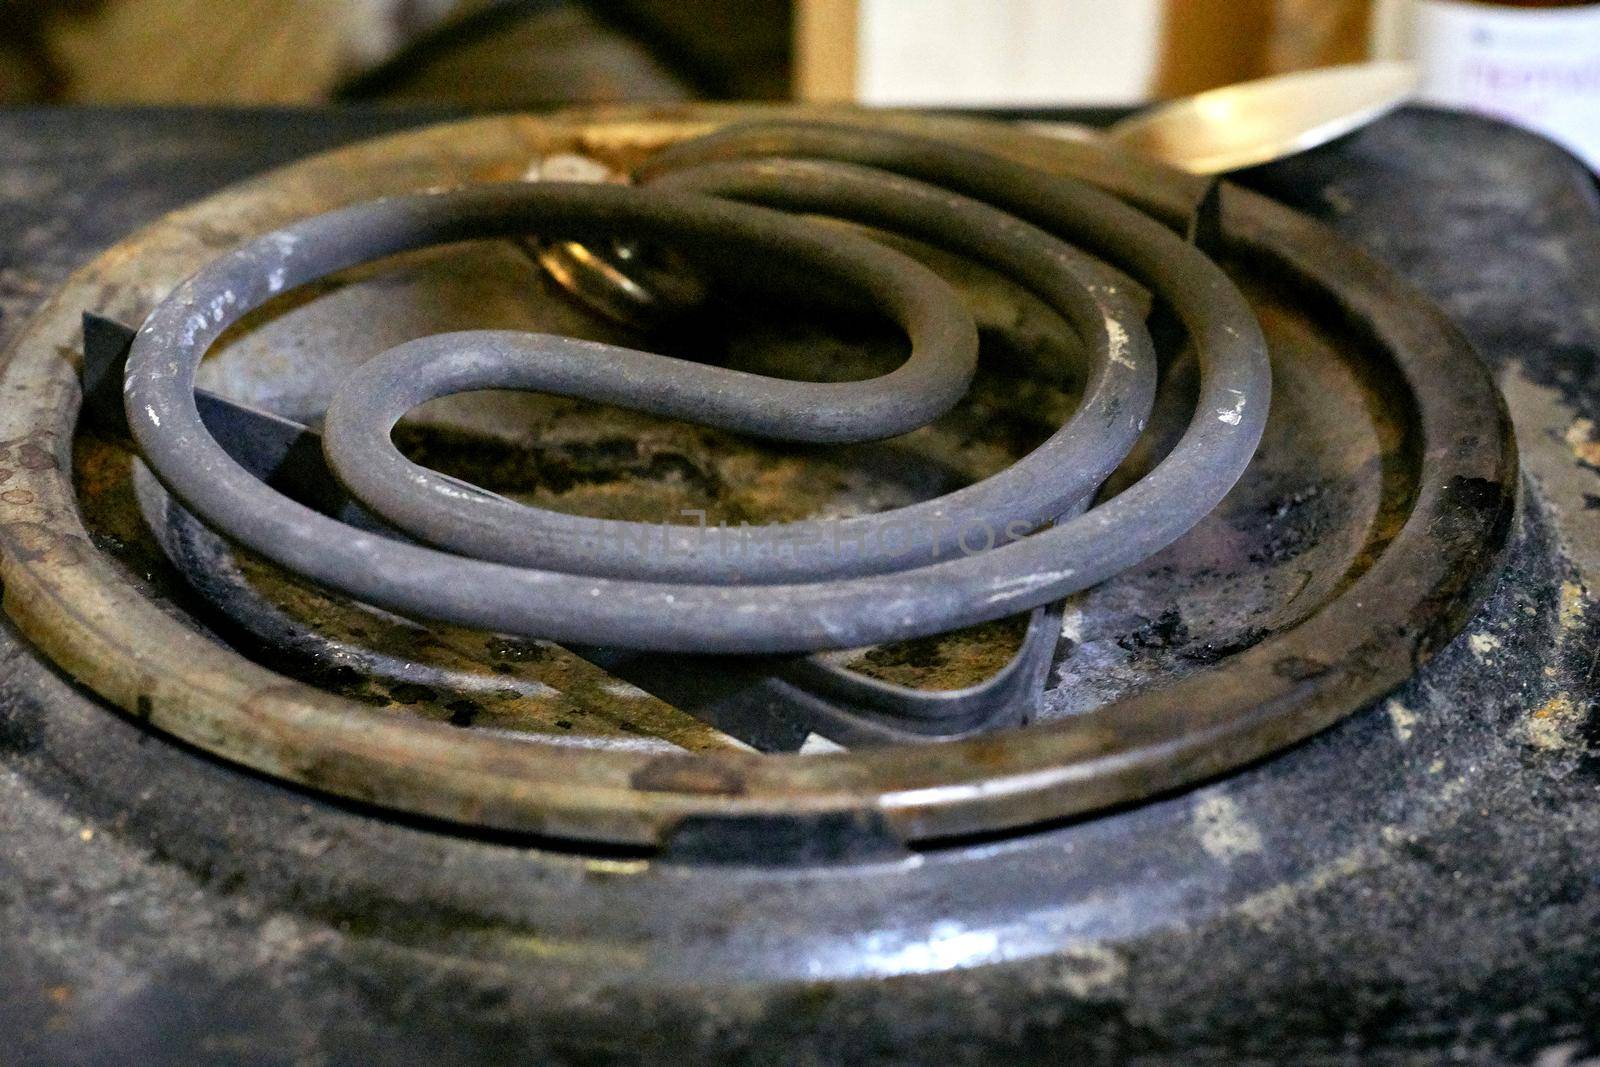 Spiral of an old dirty electric stove for cooking or heating food by jovani68